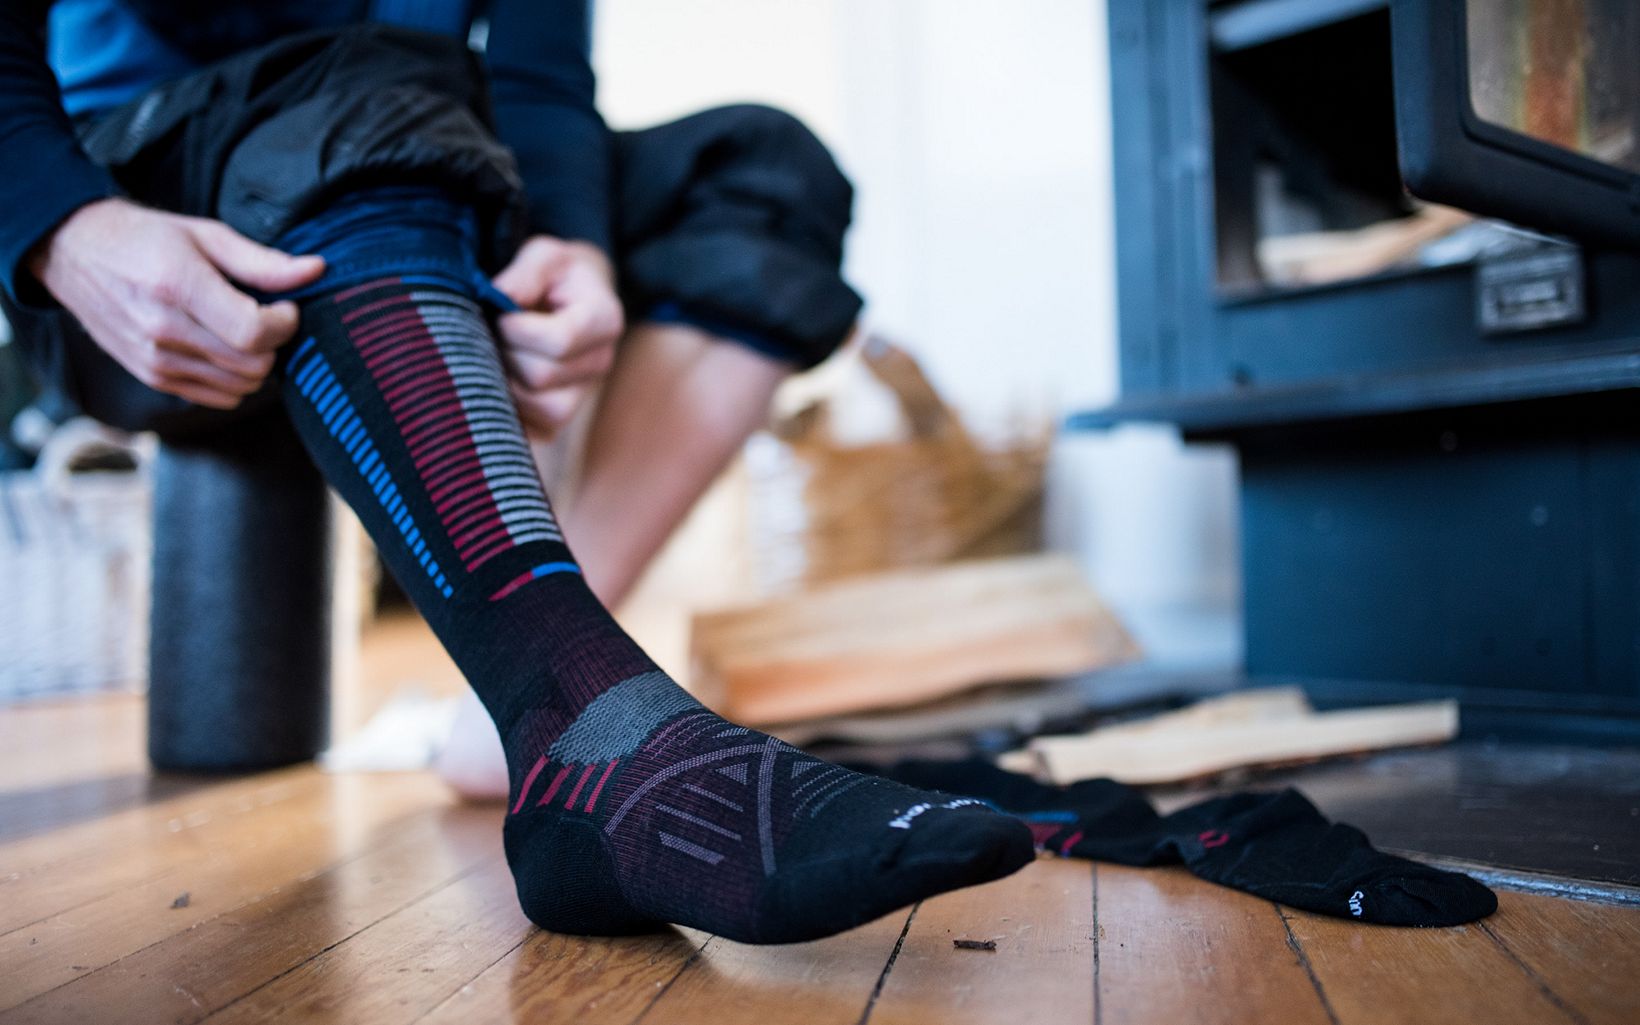 For every pair of socks purchased on smartwool.com during October 2018, $1 per pair will go to support TNC in Colorado.